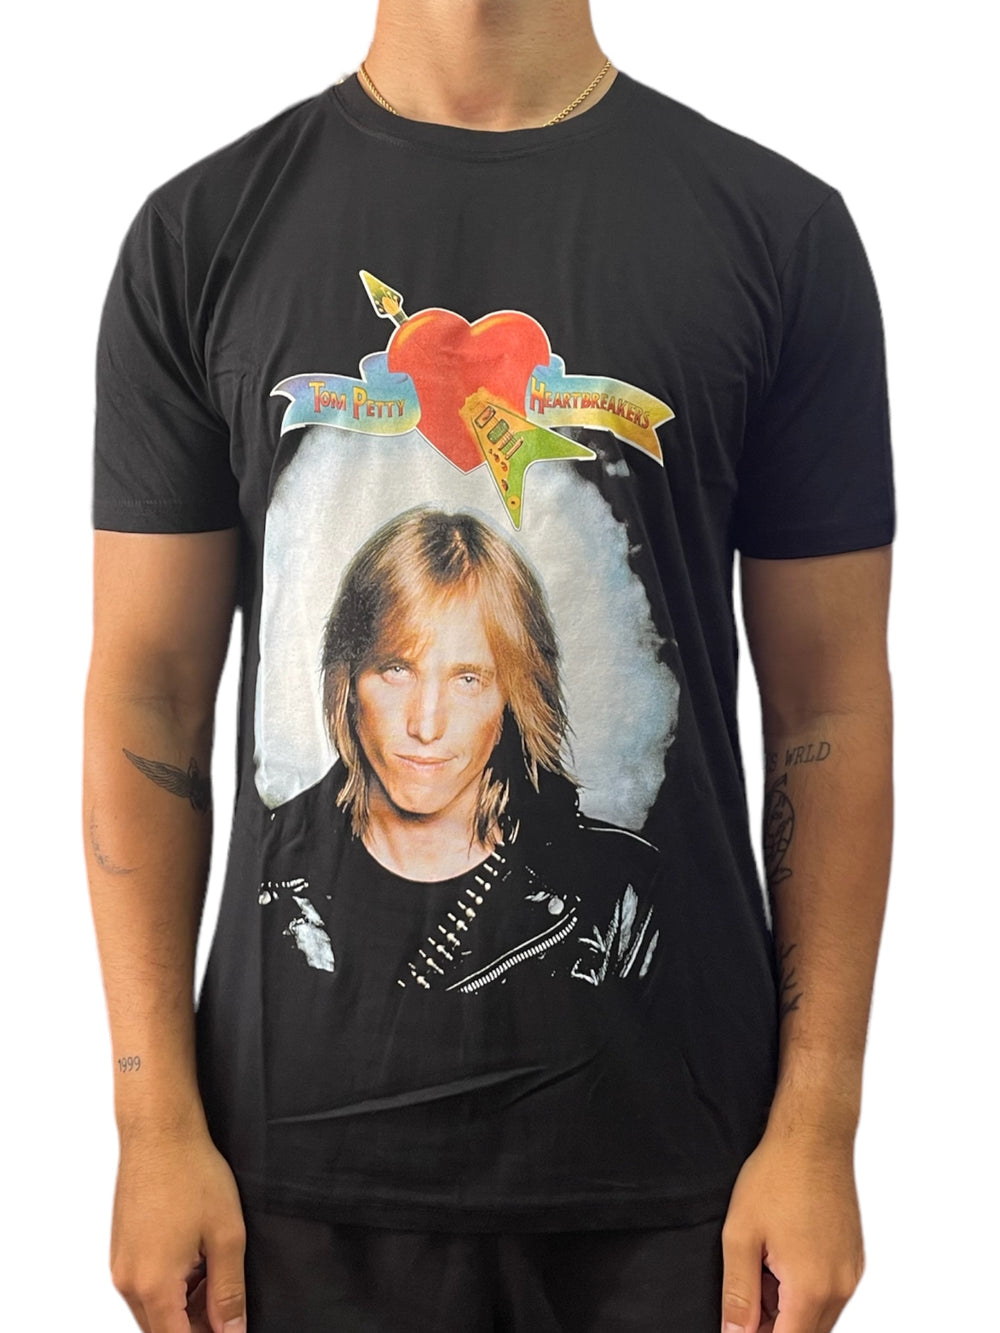 Tom Petty & The Heartbreakers - First Album Unisex Official T Shirt Brand New Various Sizes